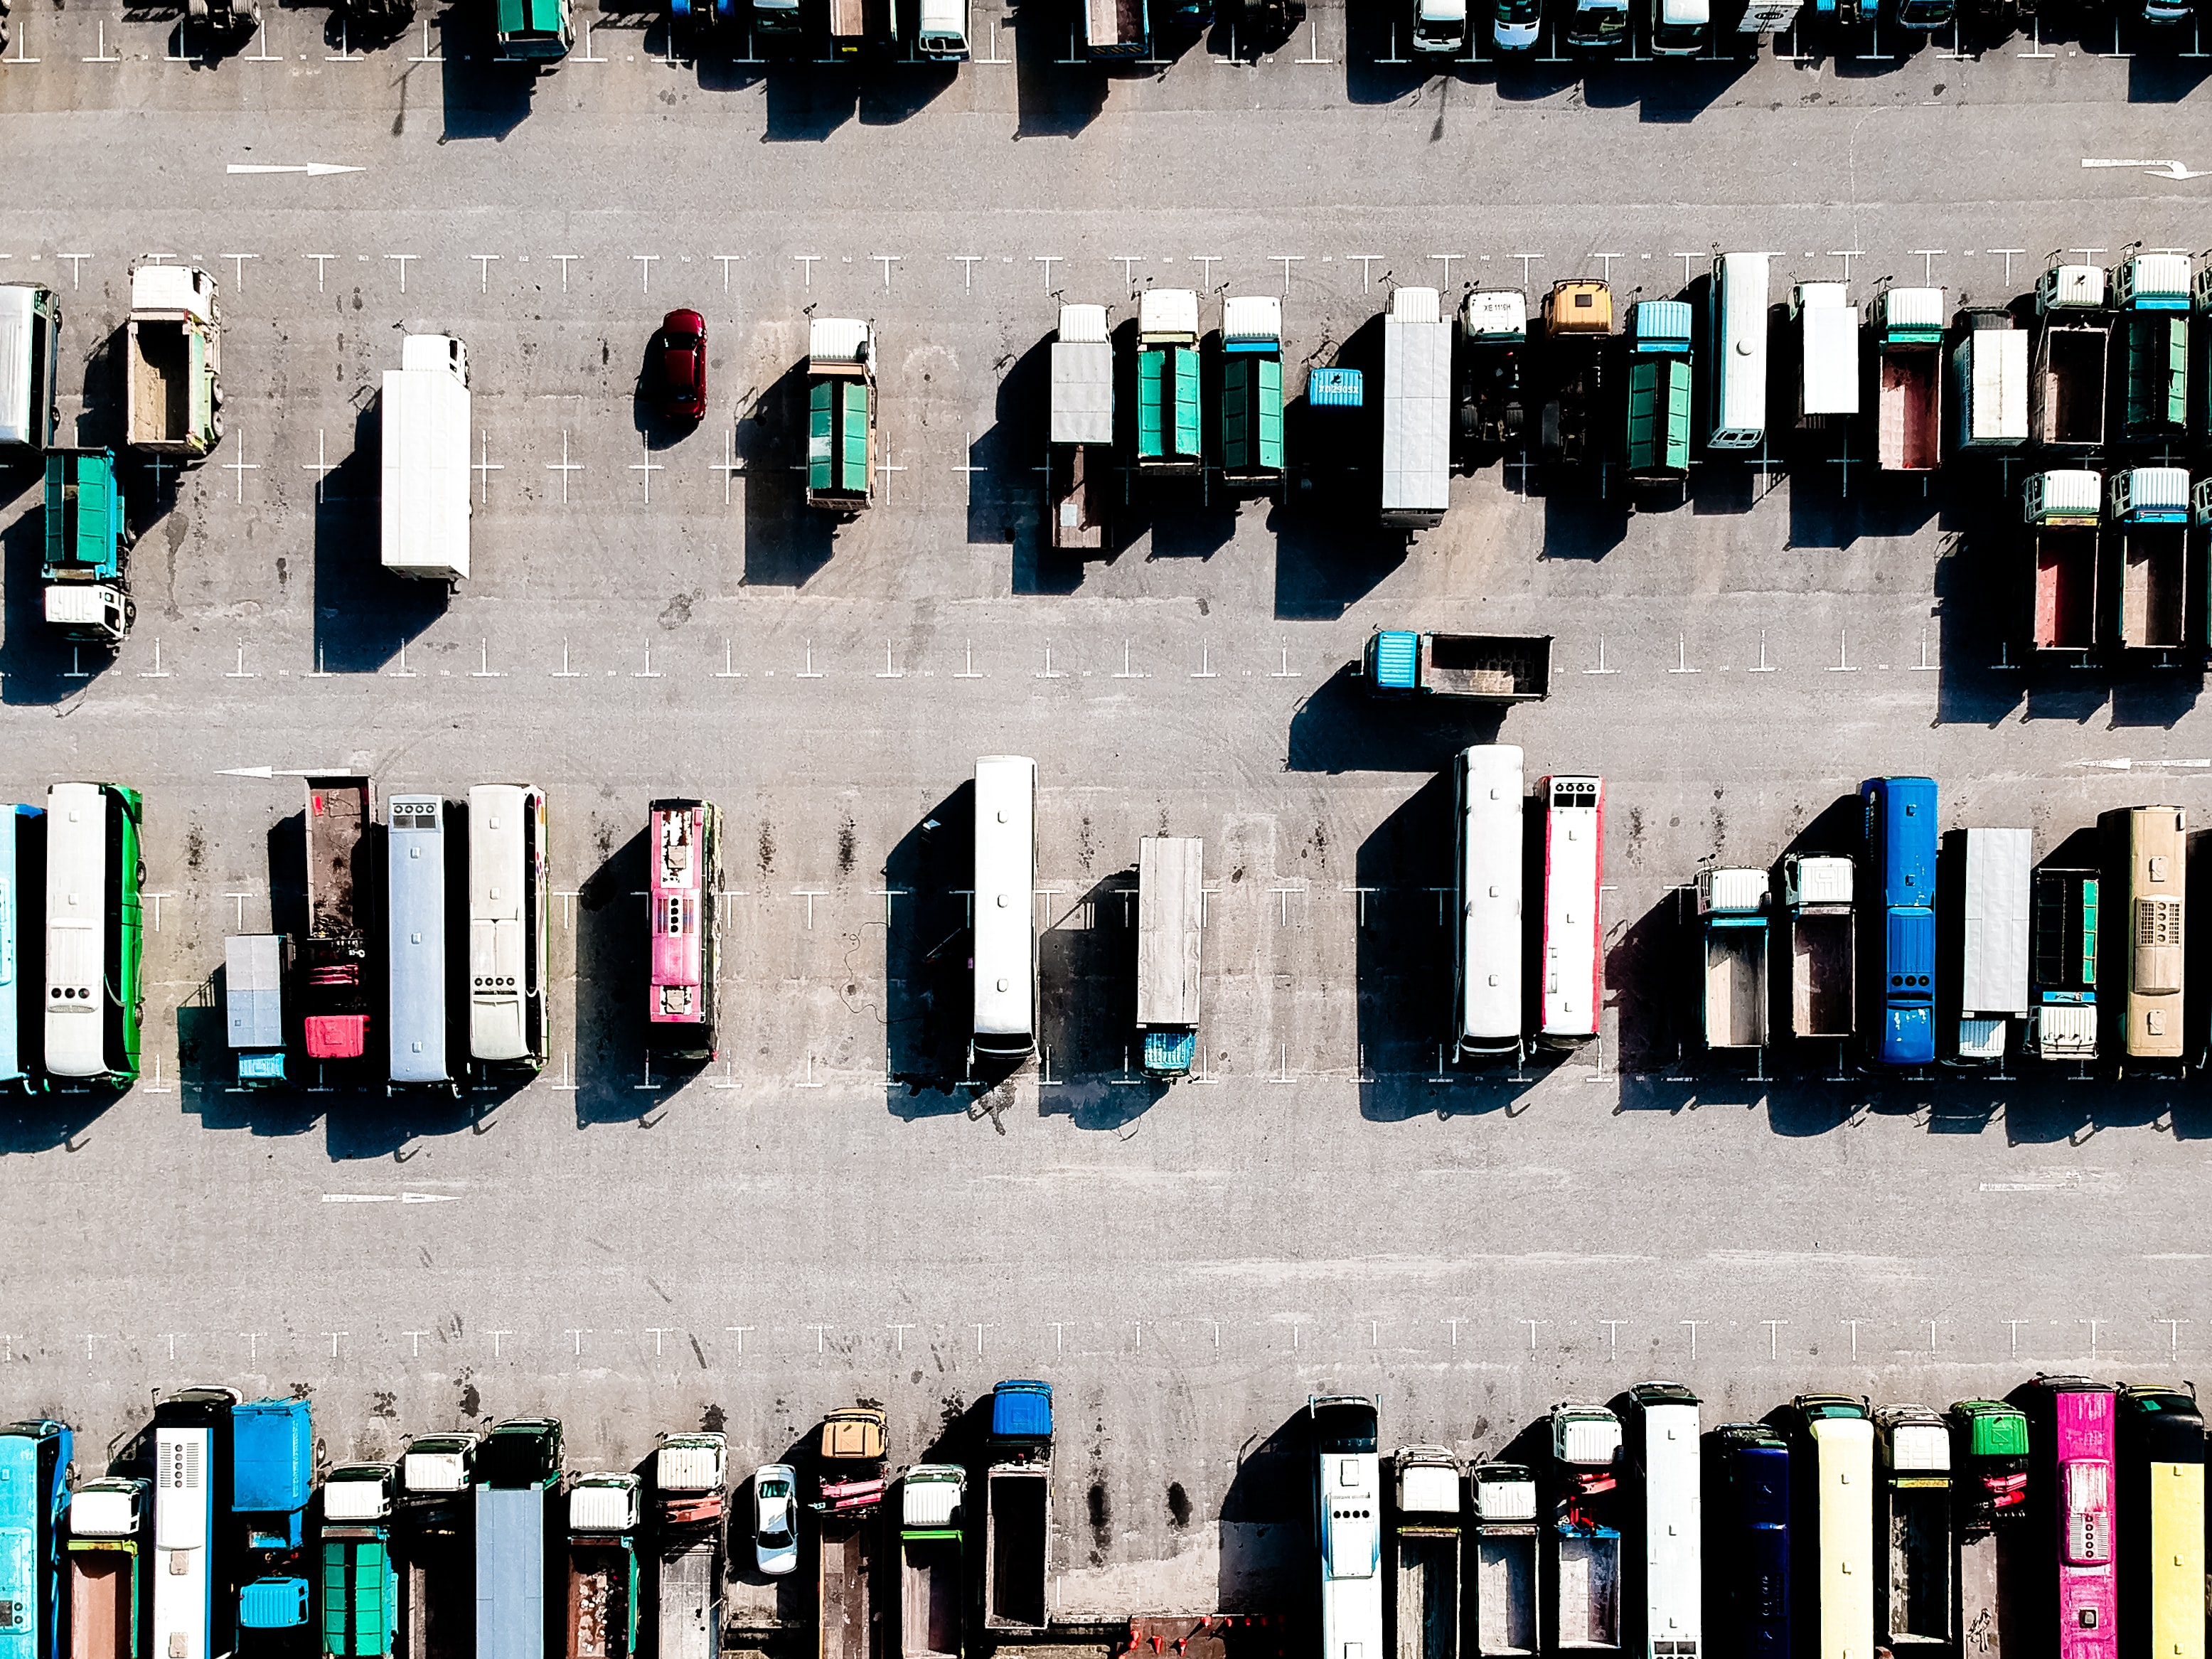 An aerial view of trucks parked in a parking lot